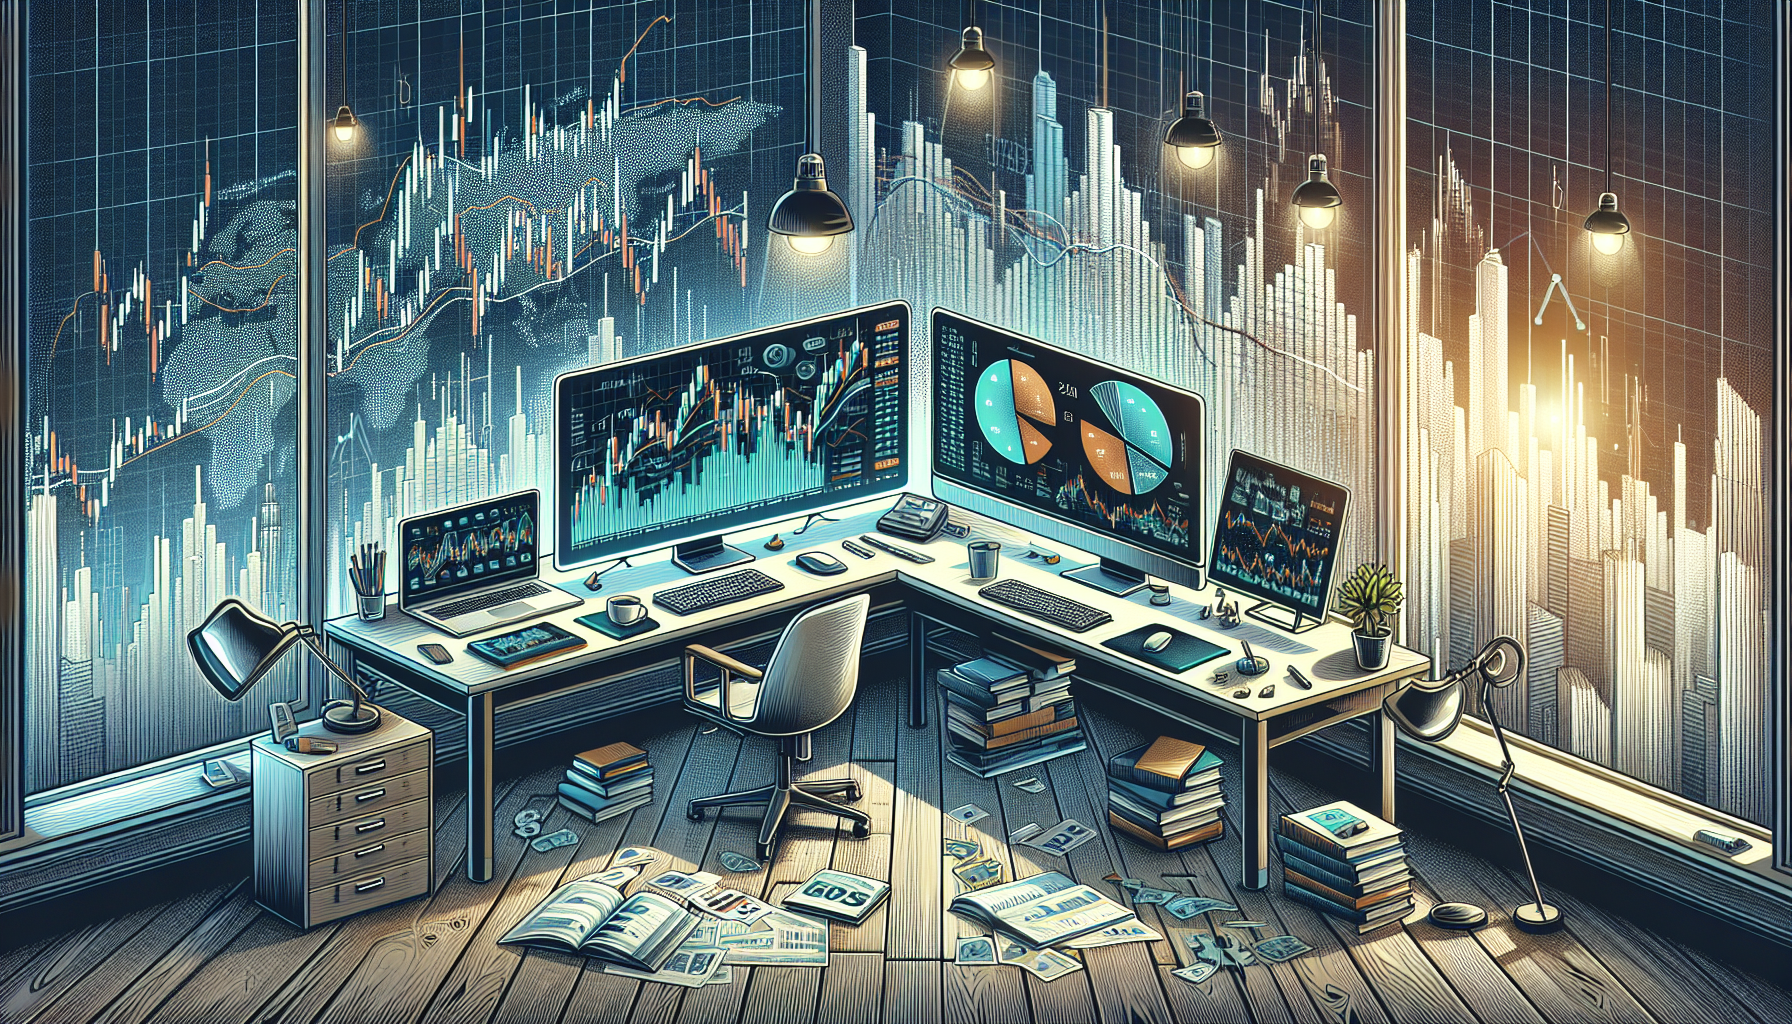 Investing versus trading: What's the difference?